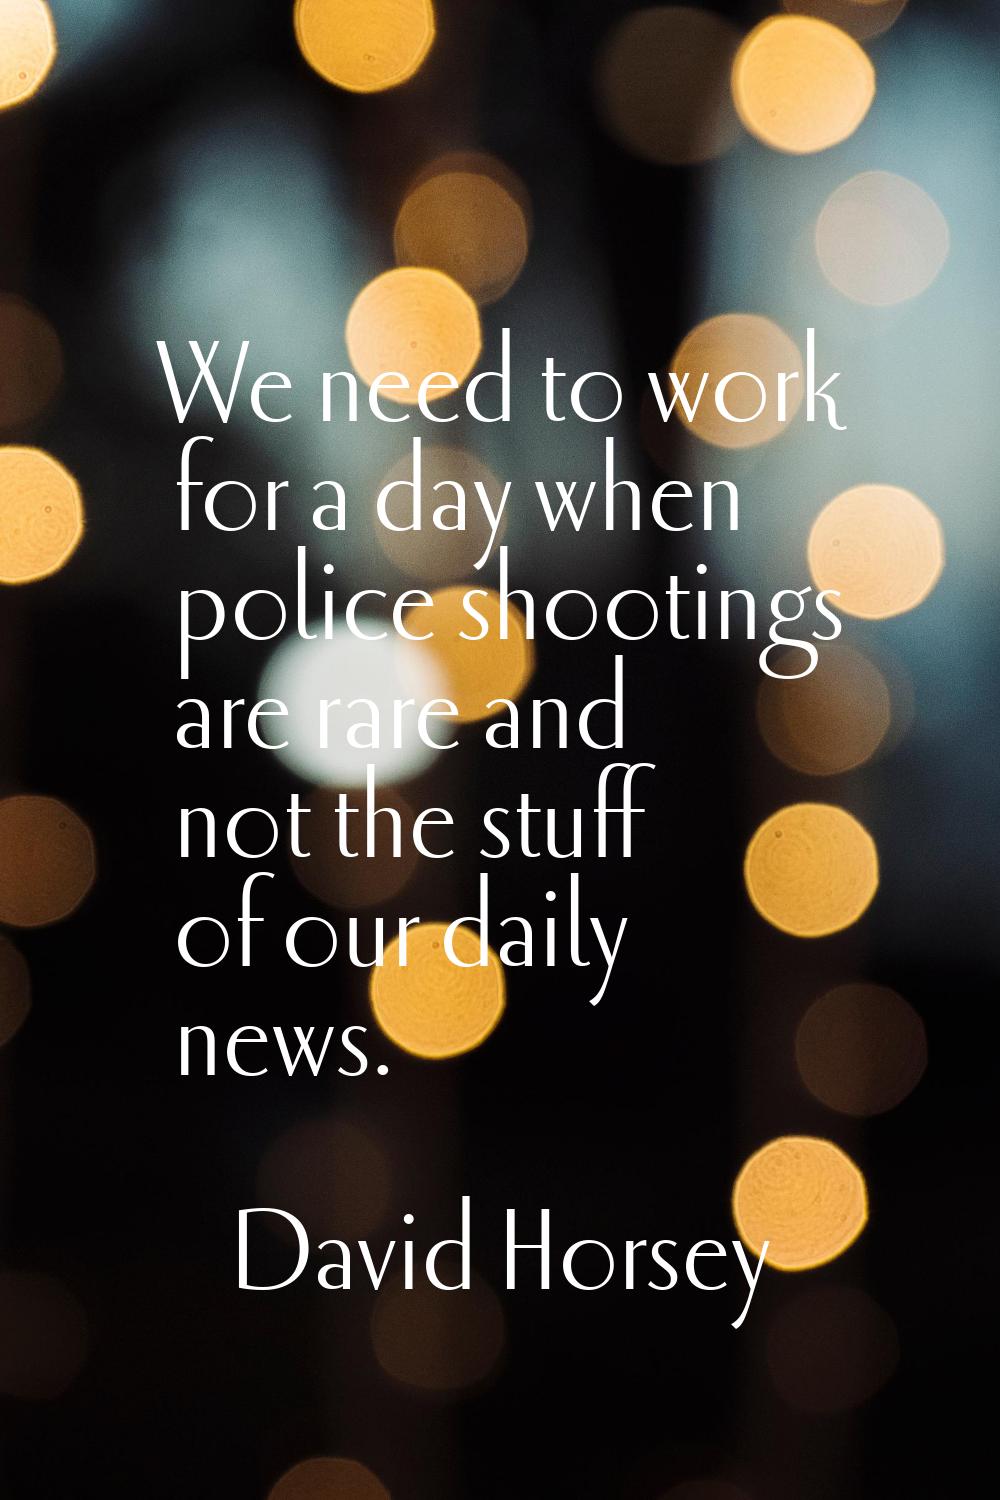 We need to work for a day when police shootings are rare and not the stuff of our daily news.